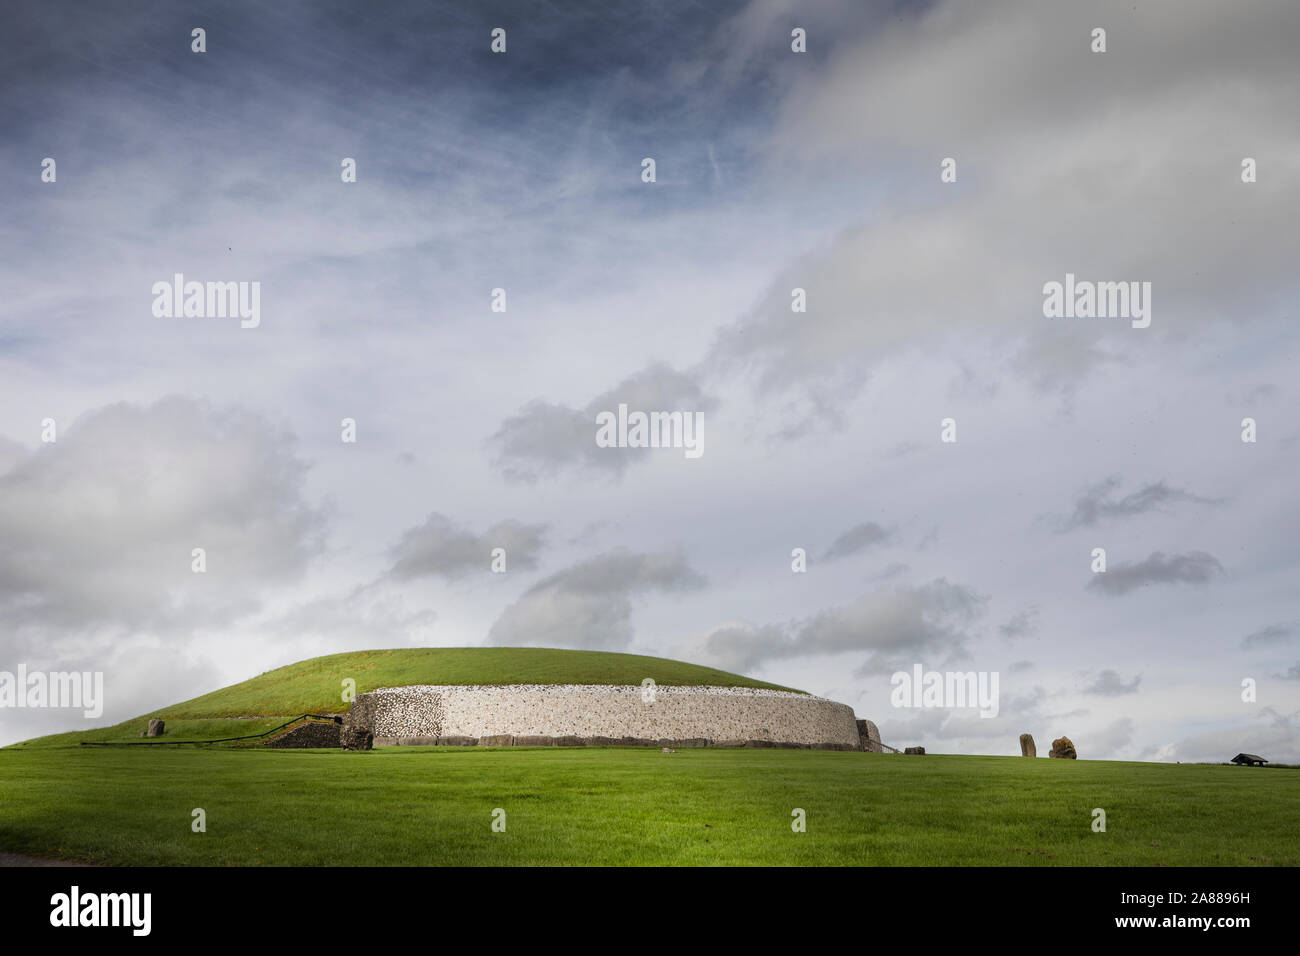 Newgrange megalithic burial mound and standing stones, County Meath, Republic of Ireland Stock Photo